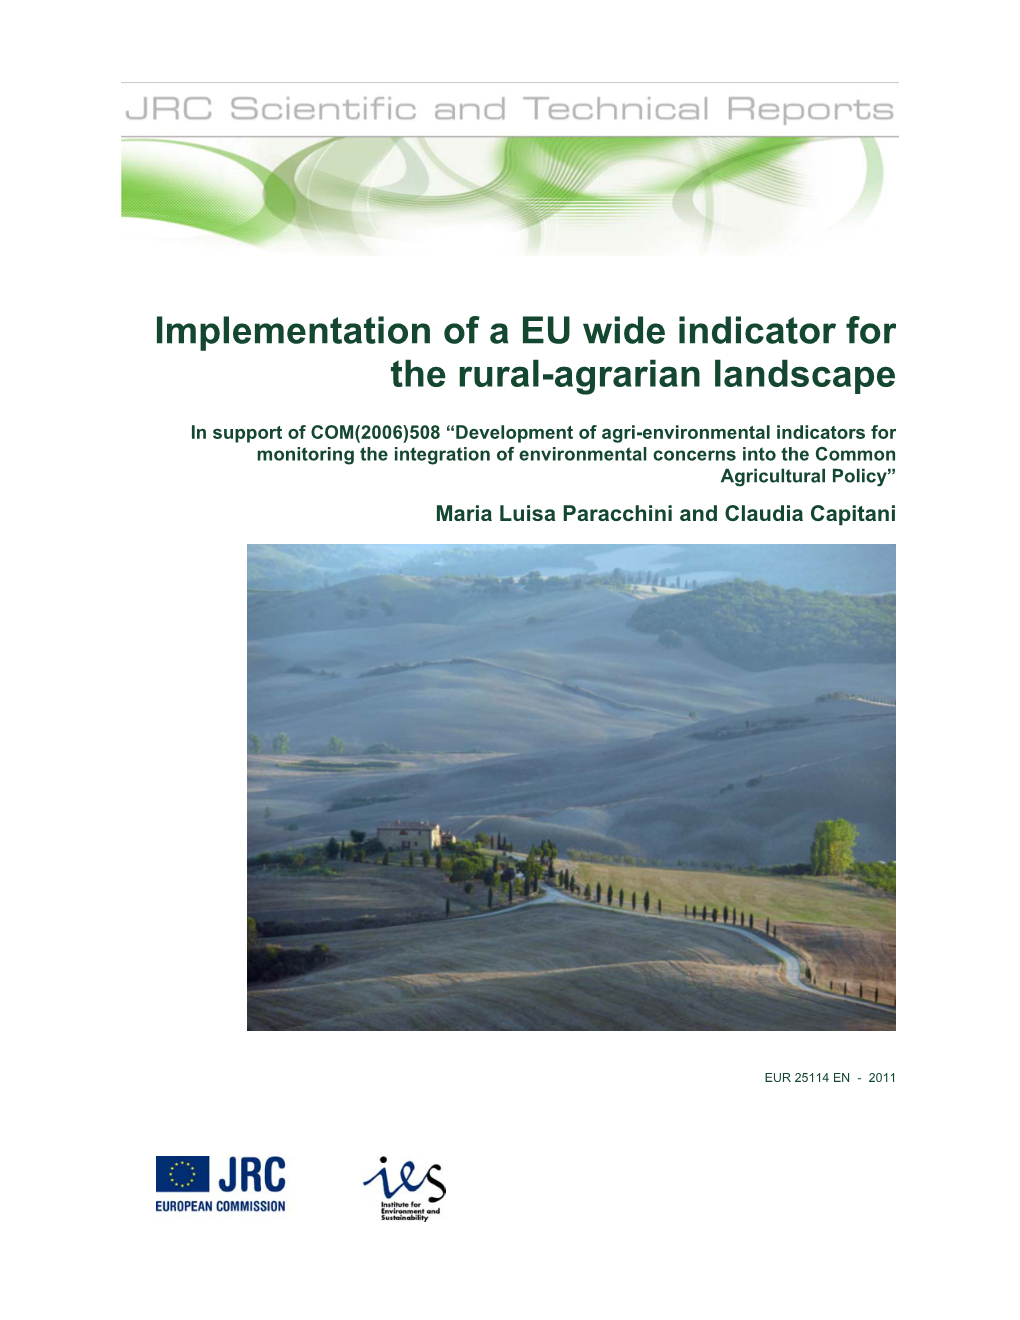 Implementation of a EU Wide Indicator for the Rural-Agrarian Landscape